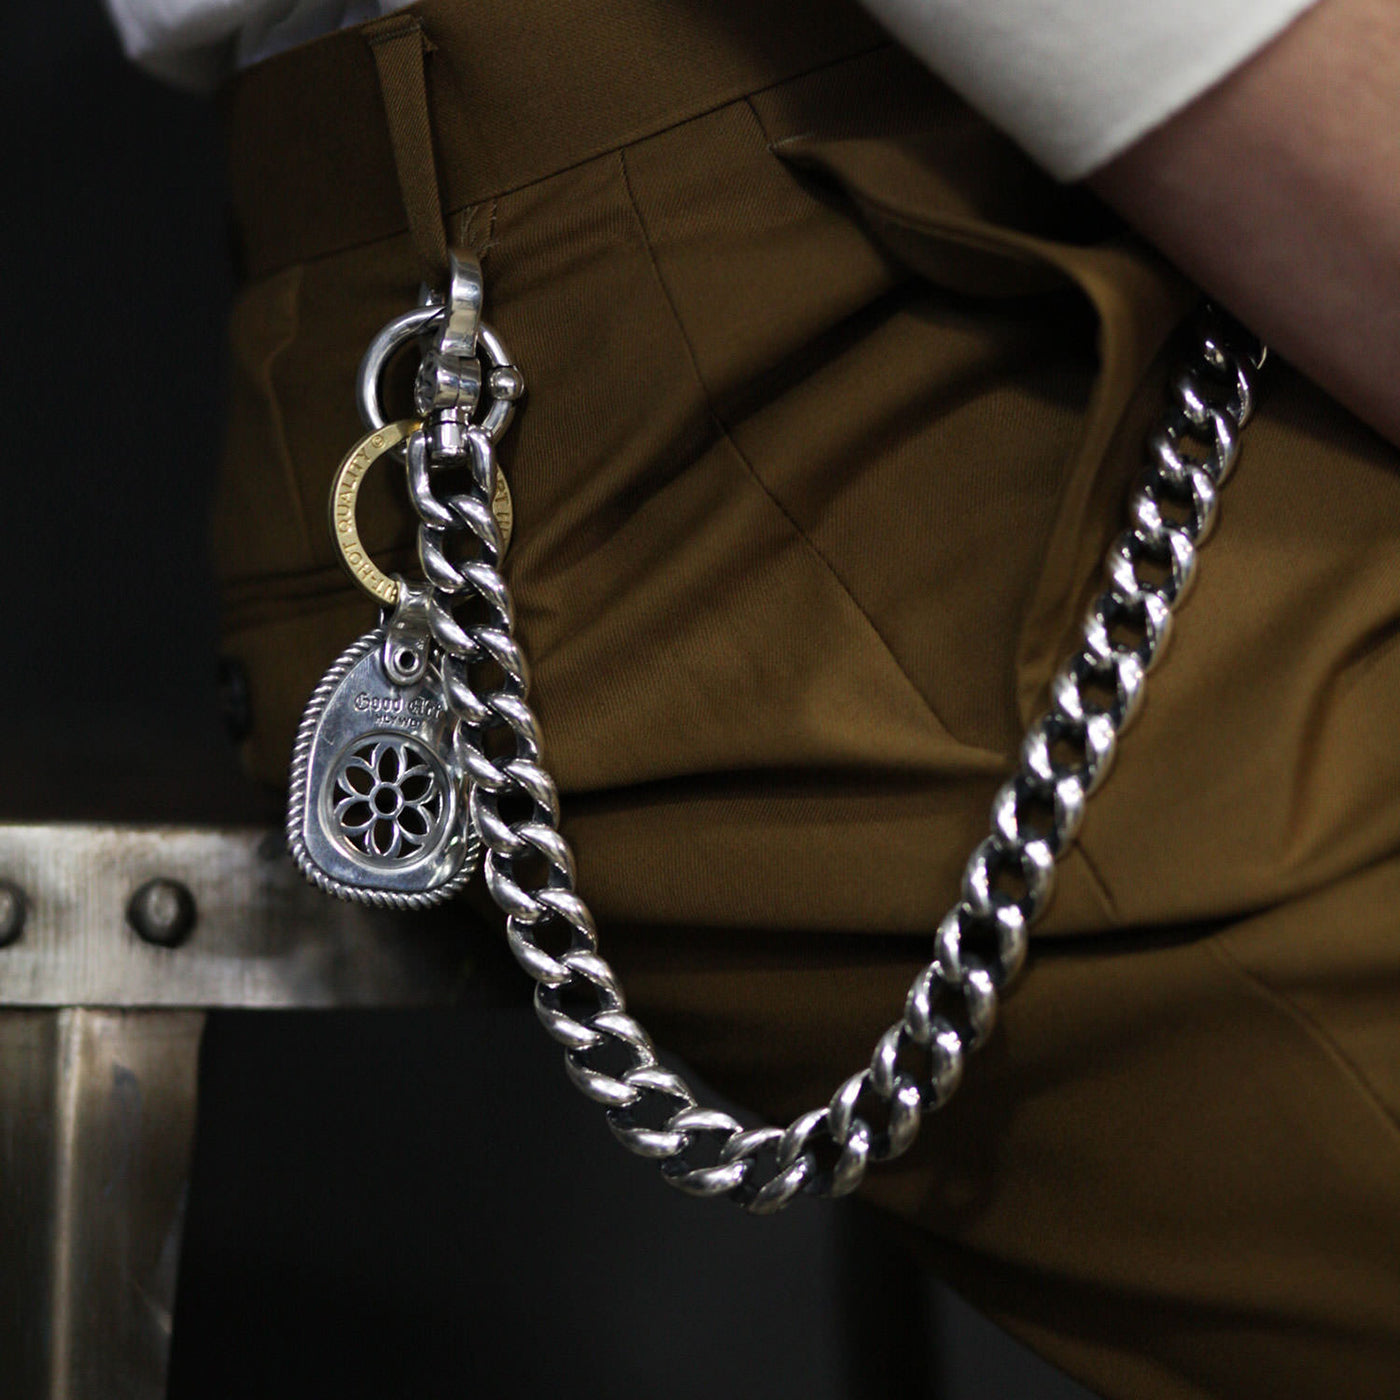 Big eye wallet chain shown clipped on to pants, with another keychain clipped to it.